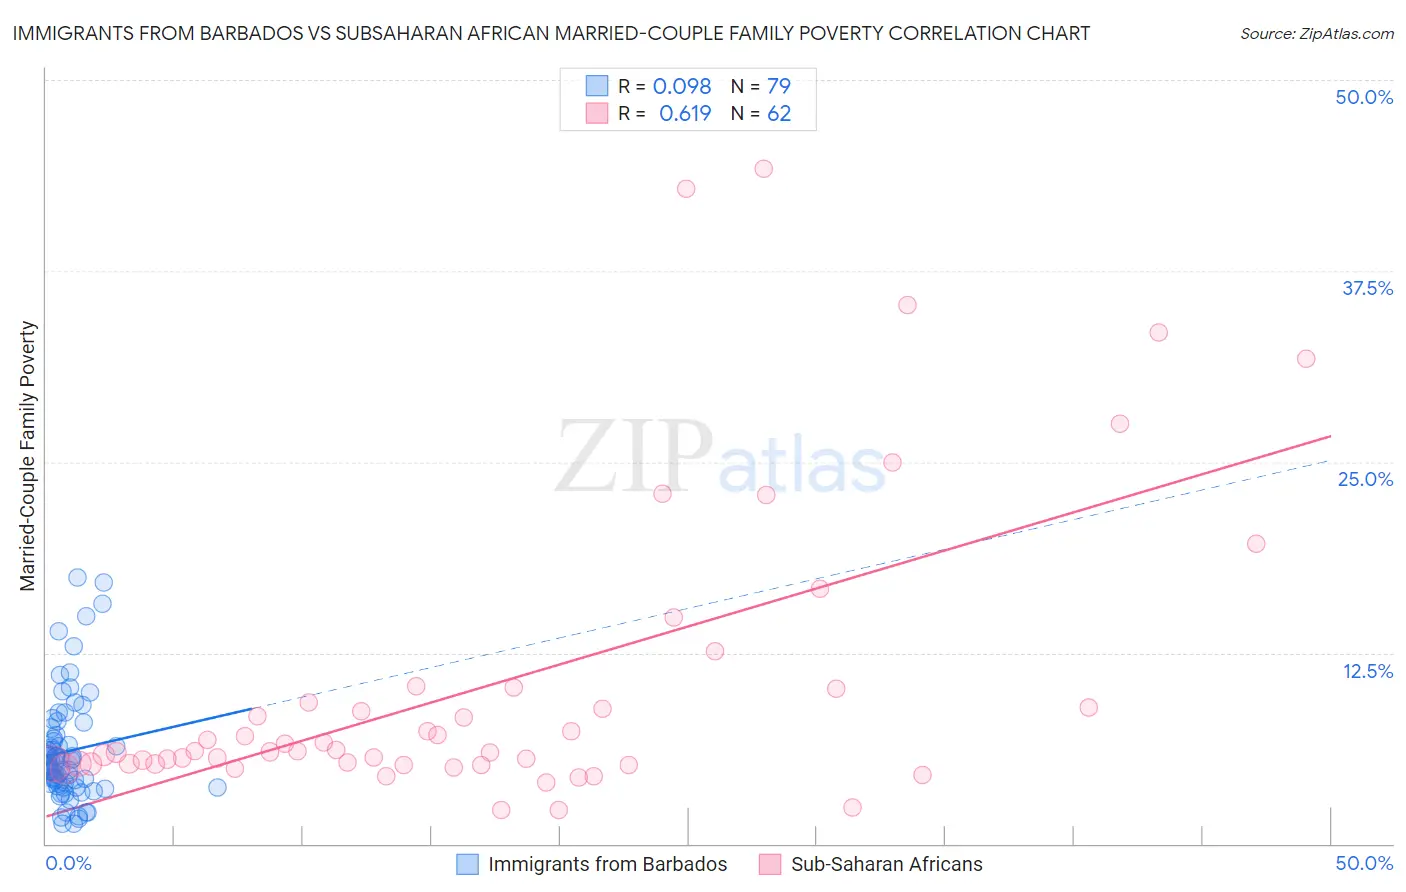 Immigrants from Barbados vs Subsaharan African Married-Couple Family Poverty